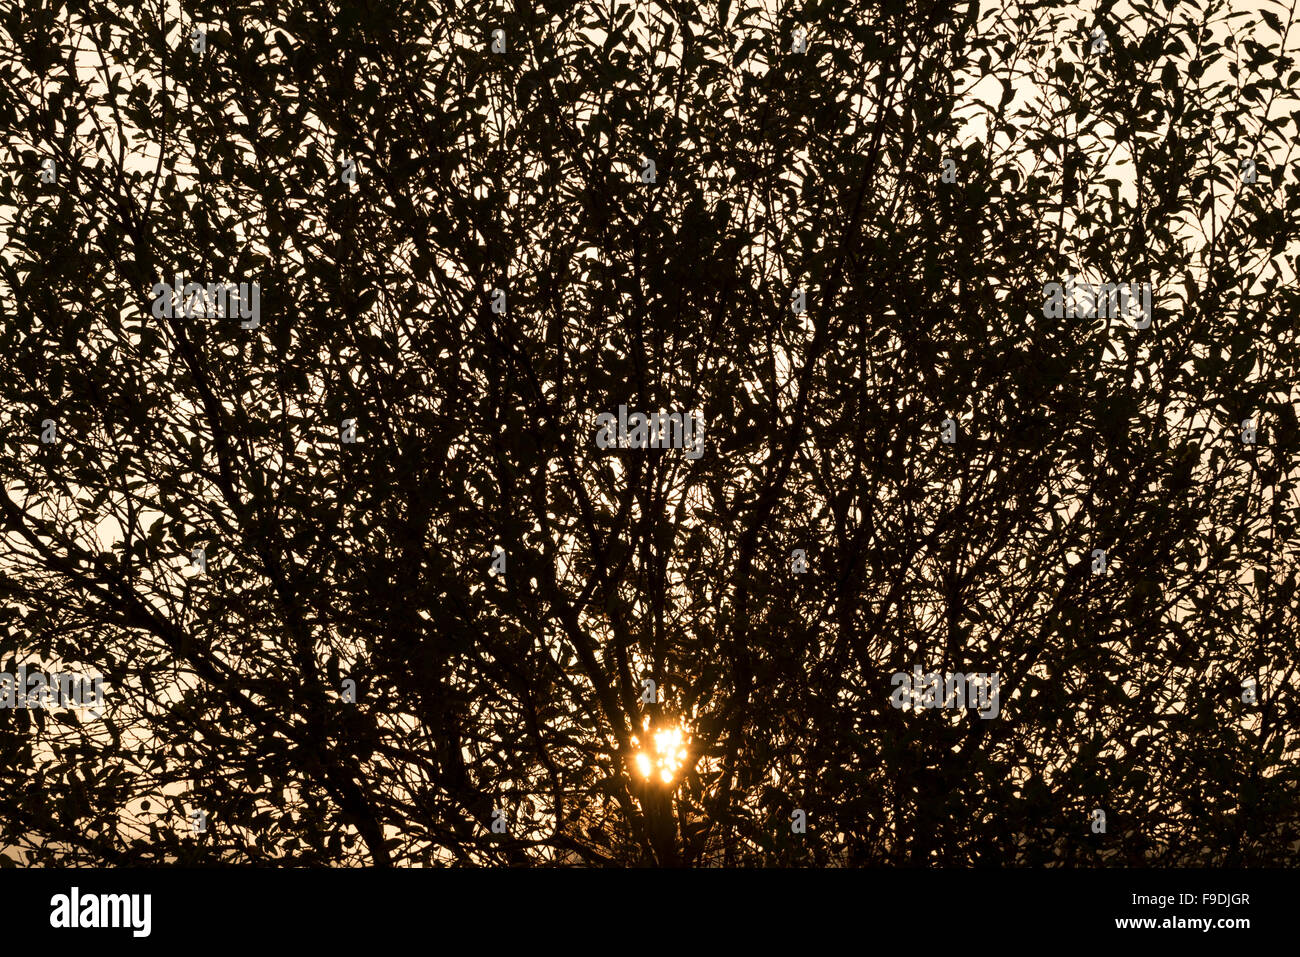 Pattern of willow leaves and branches silhouetted against a morning sky with sun through the branches. Stock Photo